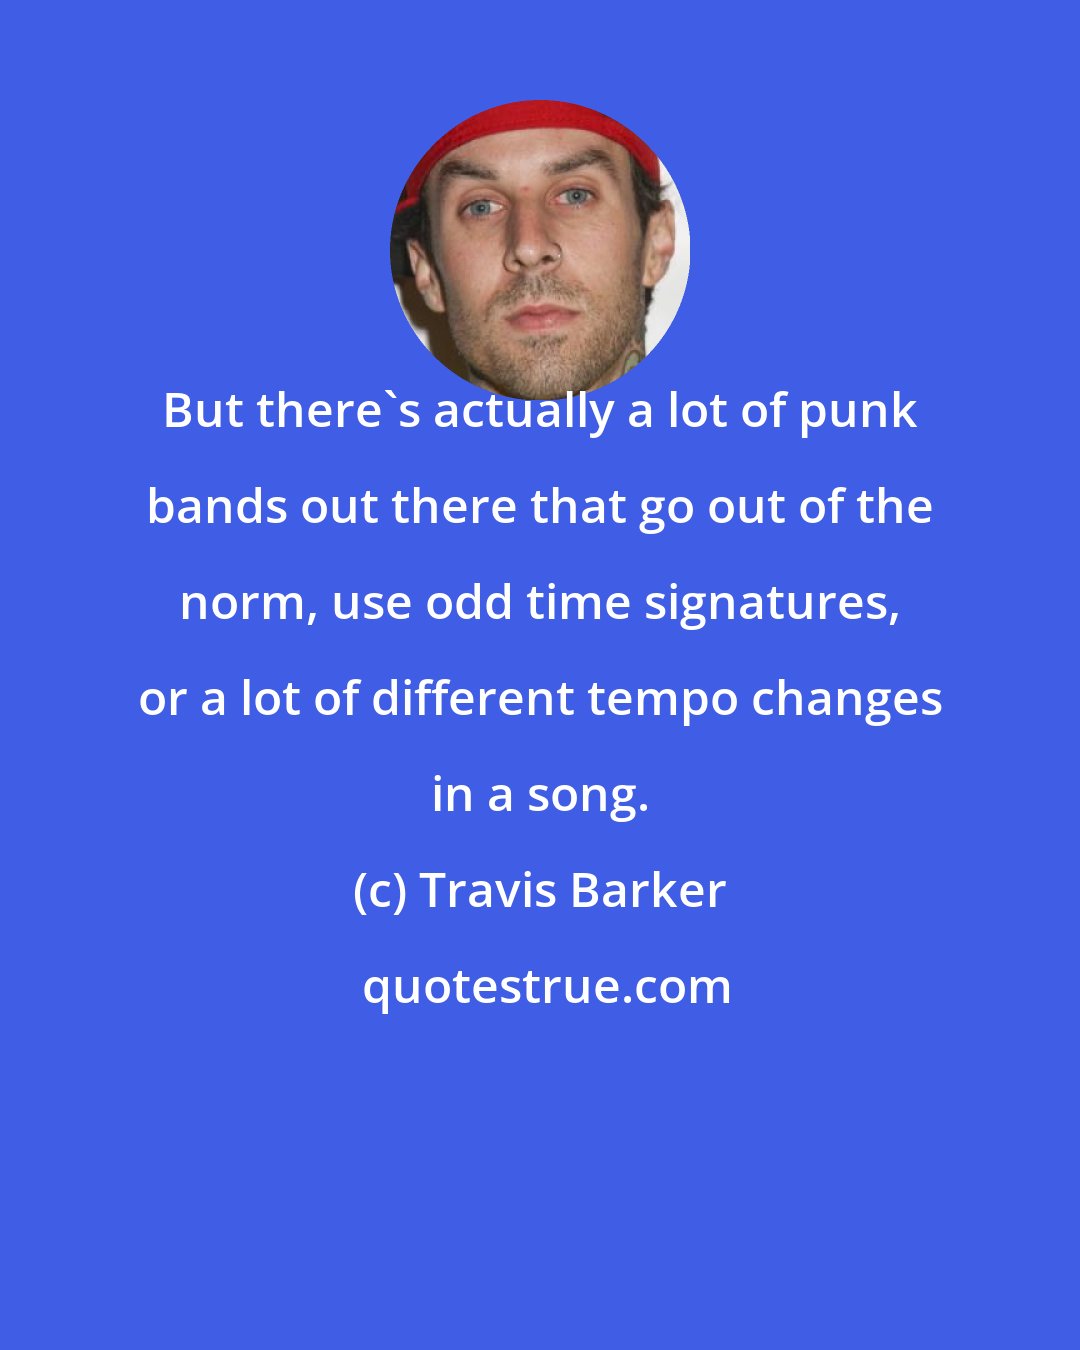 Travis Barker: But there's actually a lot of punk bands out there that go out of the norm, use odd time signatures, or a lot of different tempo changes in a song.